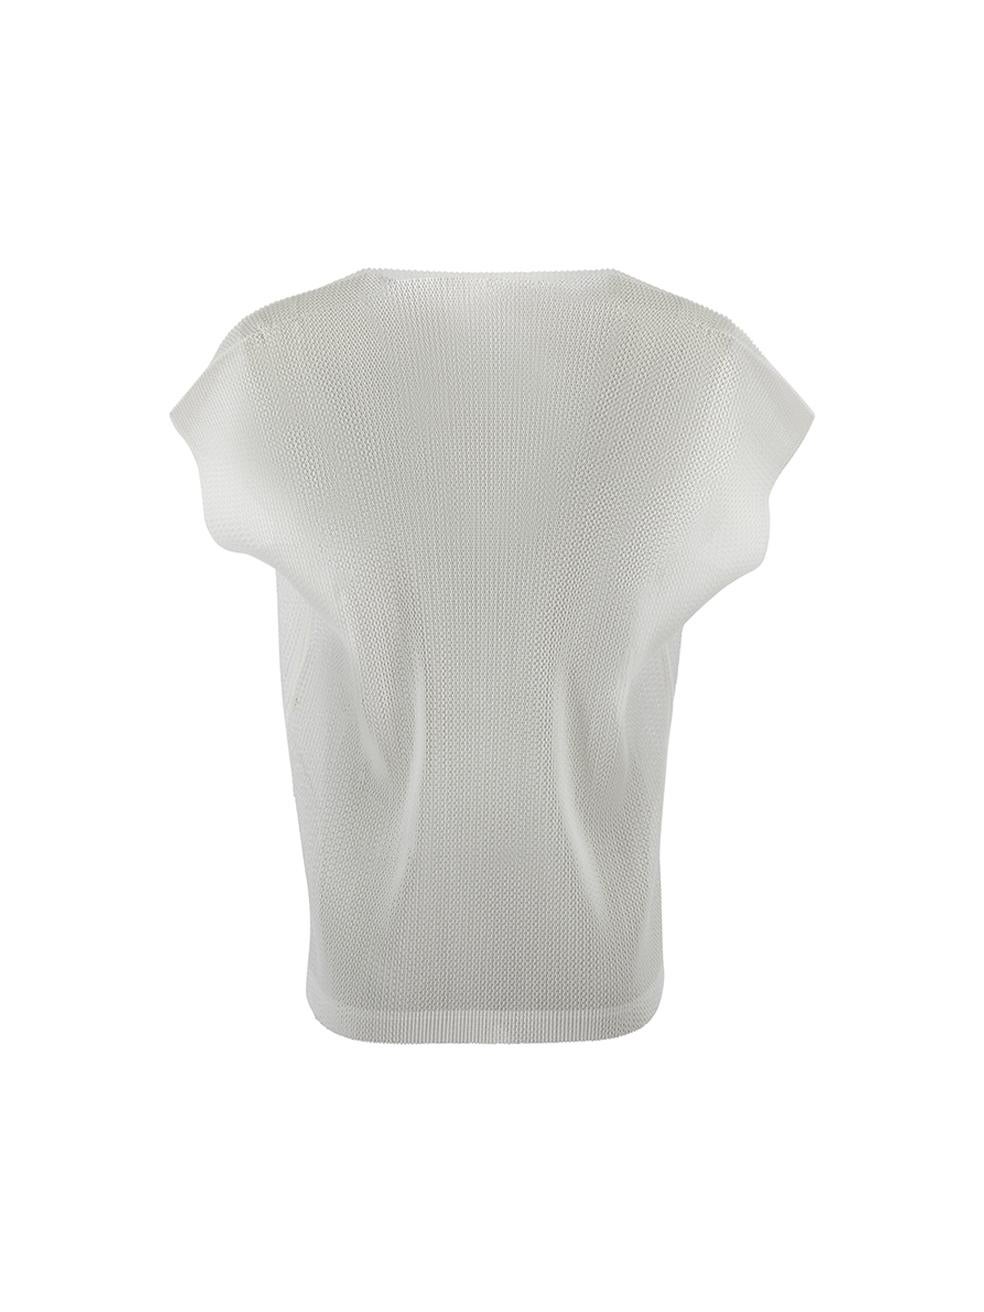 Gray Pleats Please Issey Miyake White Cap Sleeves Mesh Top Size M